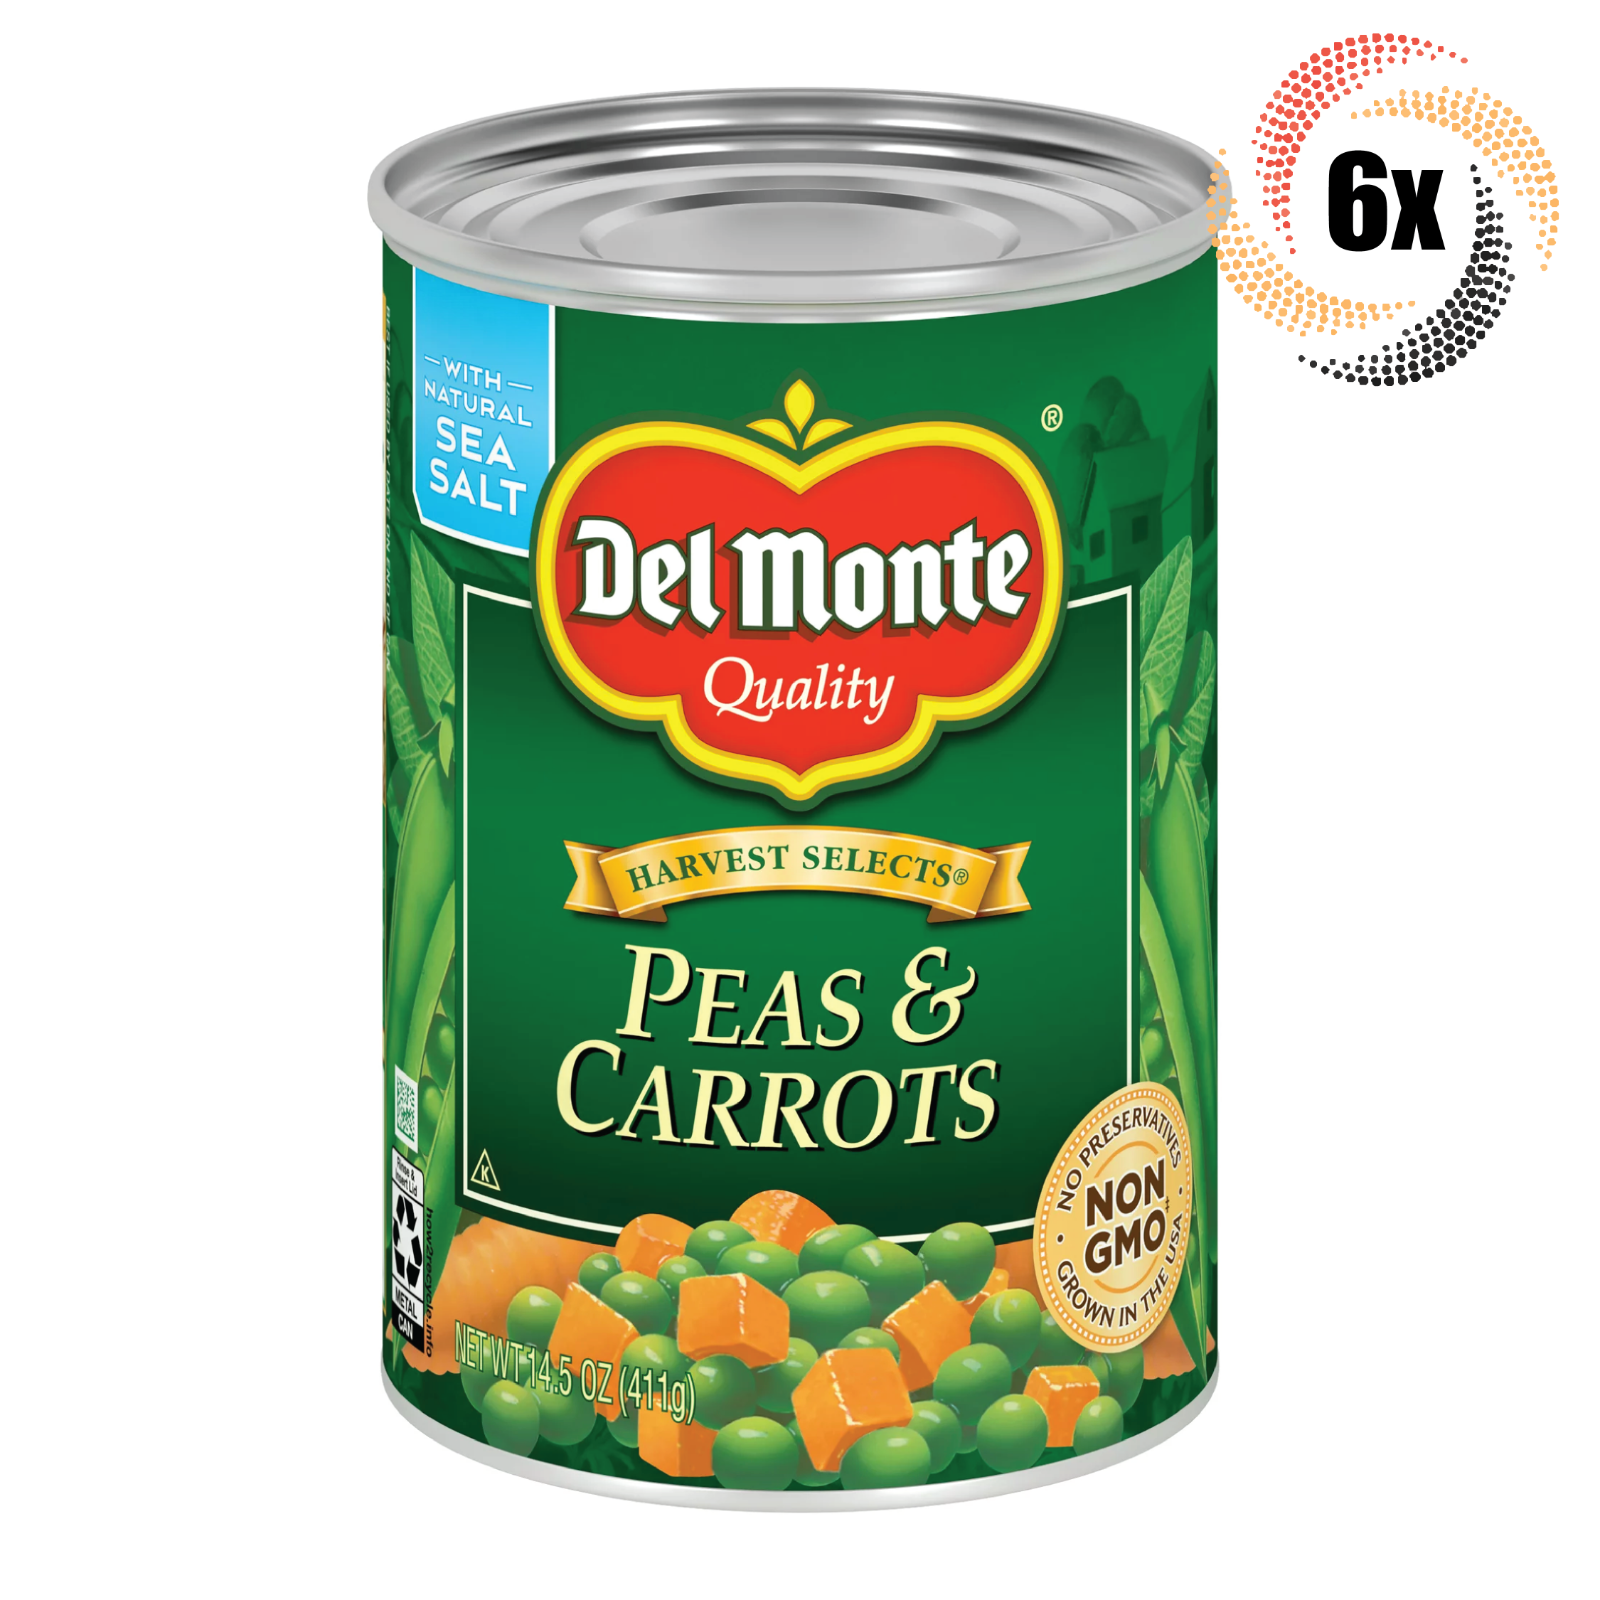 6x Cans Del Monte Peas & Carrots With Natural Sea Salt | 14.5oz | Fast Shipping! - $34.05